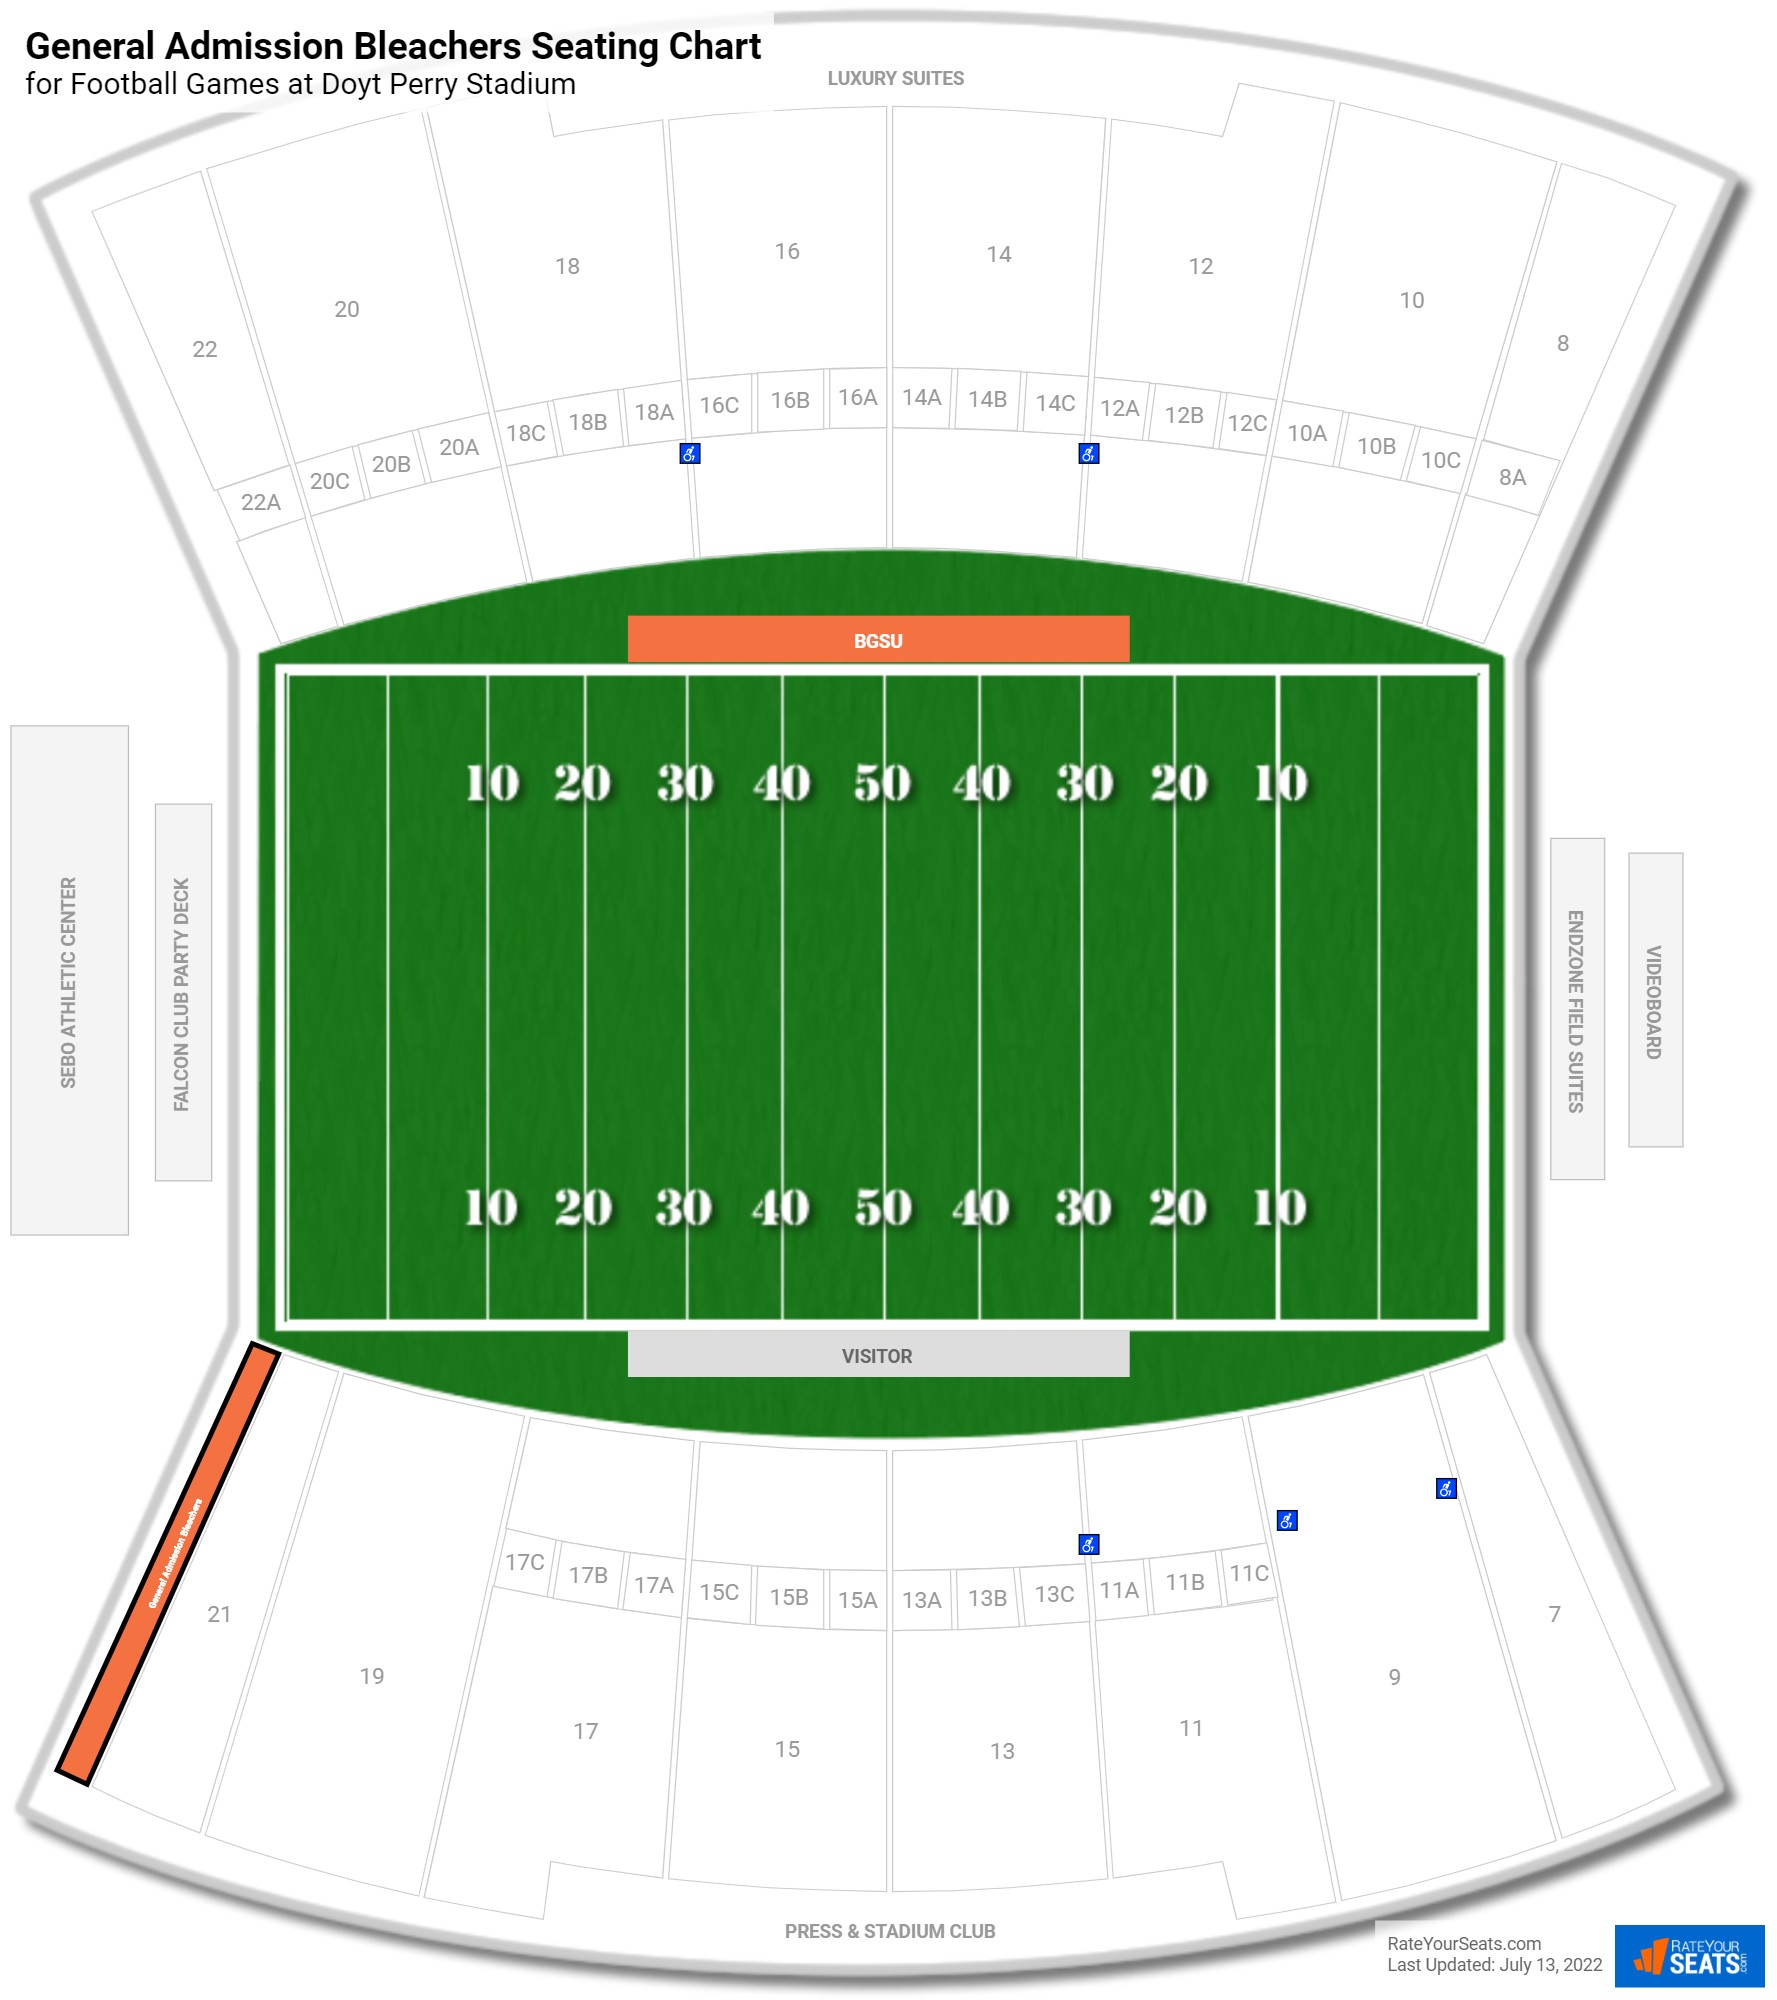 Football General Admission Bleachers Seating Chart at Doyt Perry Stadium